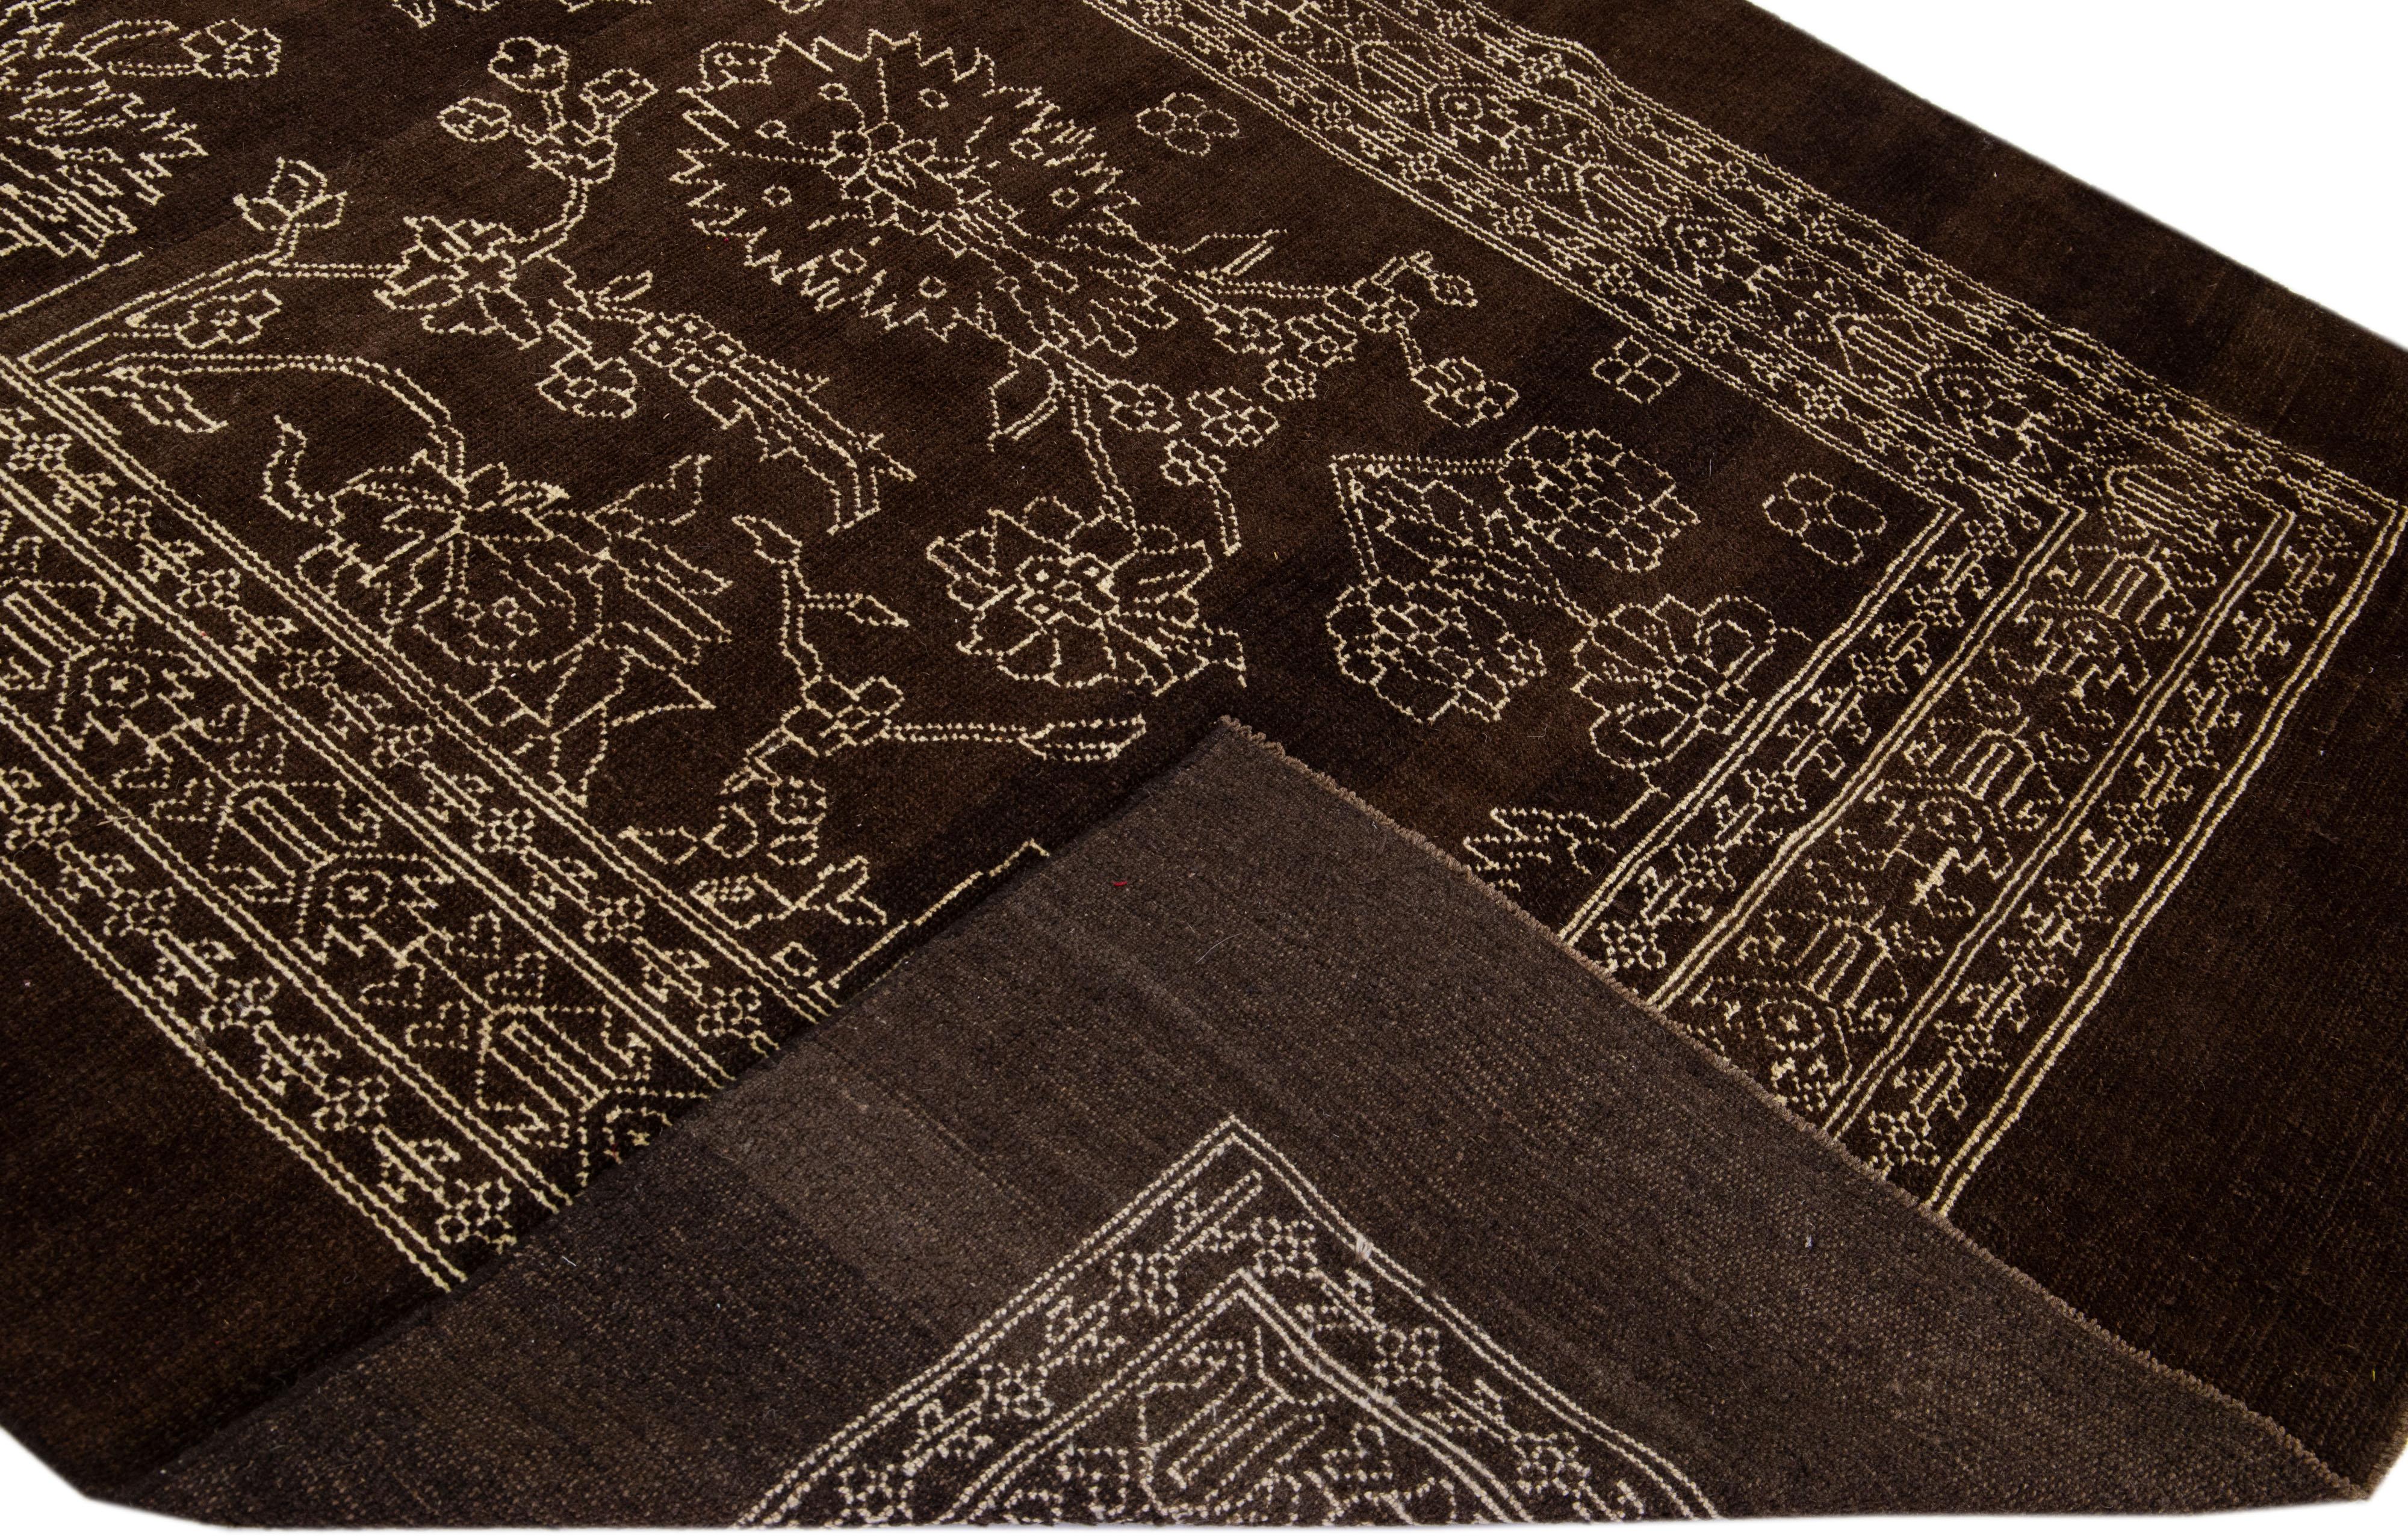 Beautiful Mid-Century Modern style rug Inspired by 19th-century regional artisans -- embodies a Classic, transitional look and modern style. This handmade wool rug makes part of our Northwest collection and features a dark brown color field and